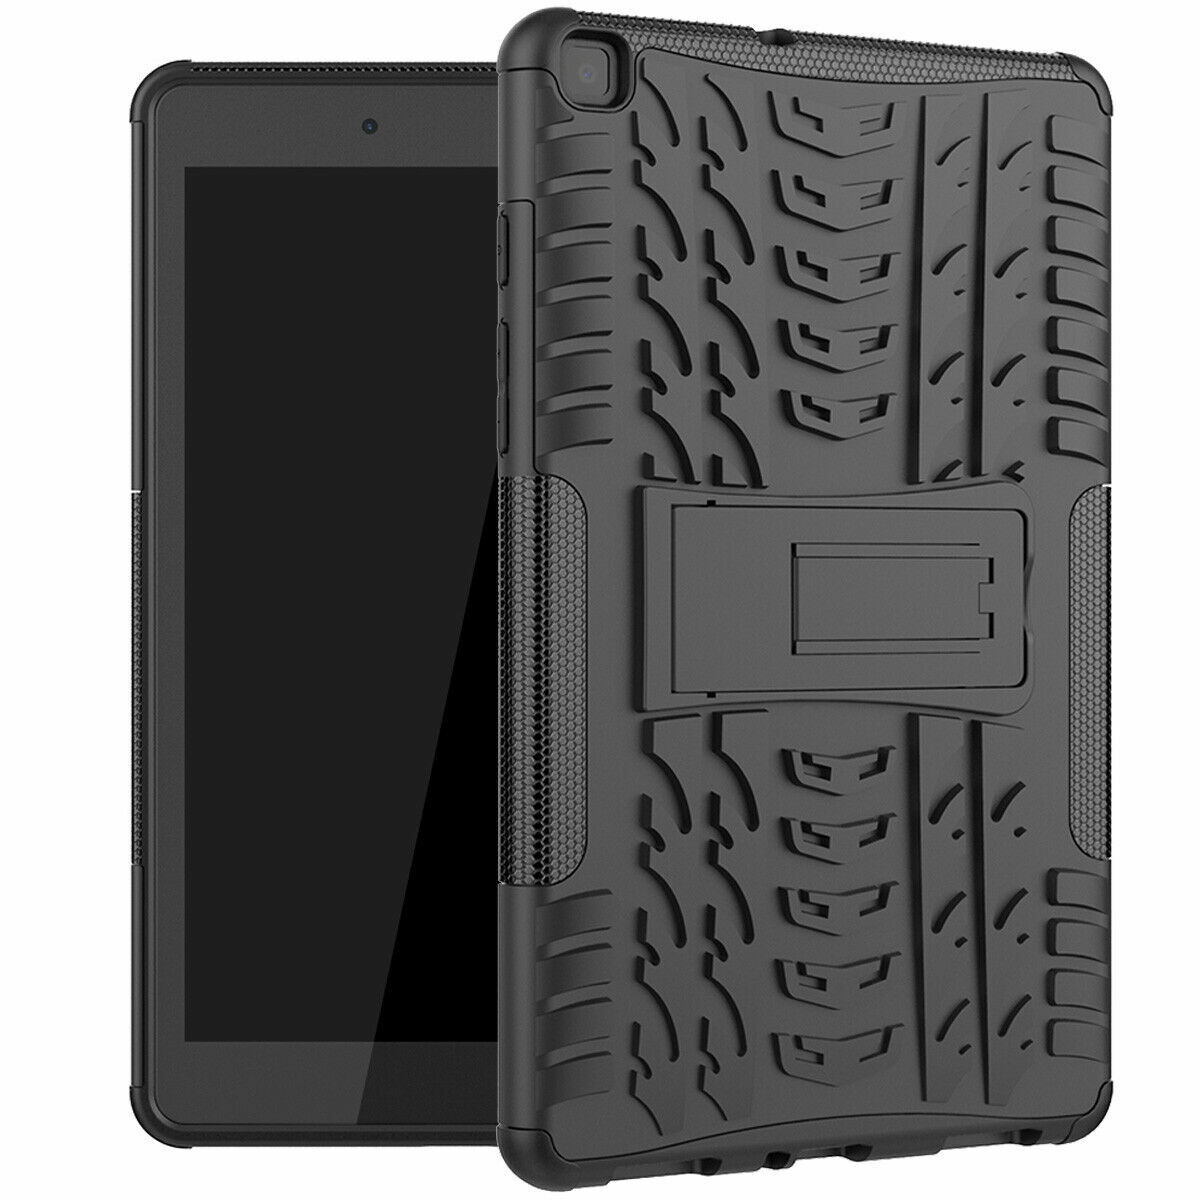 For Samsung Galaxy Tab A 8.0 SM-T290 T387 T380T350 Hybrid Rugged Hard Case Cover